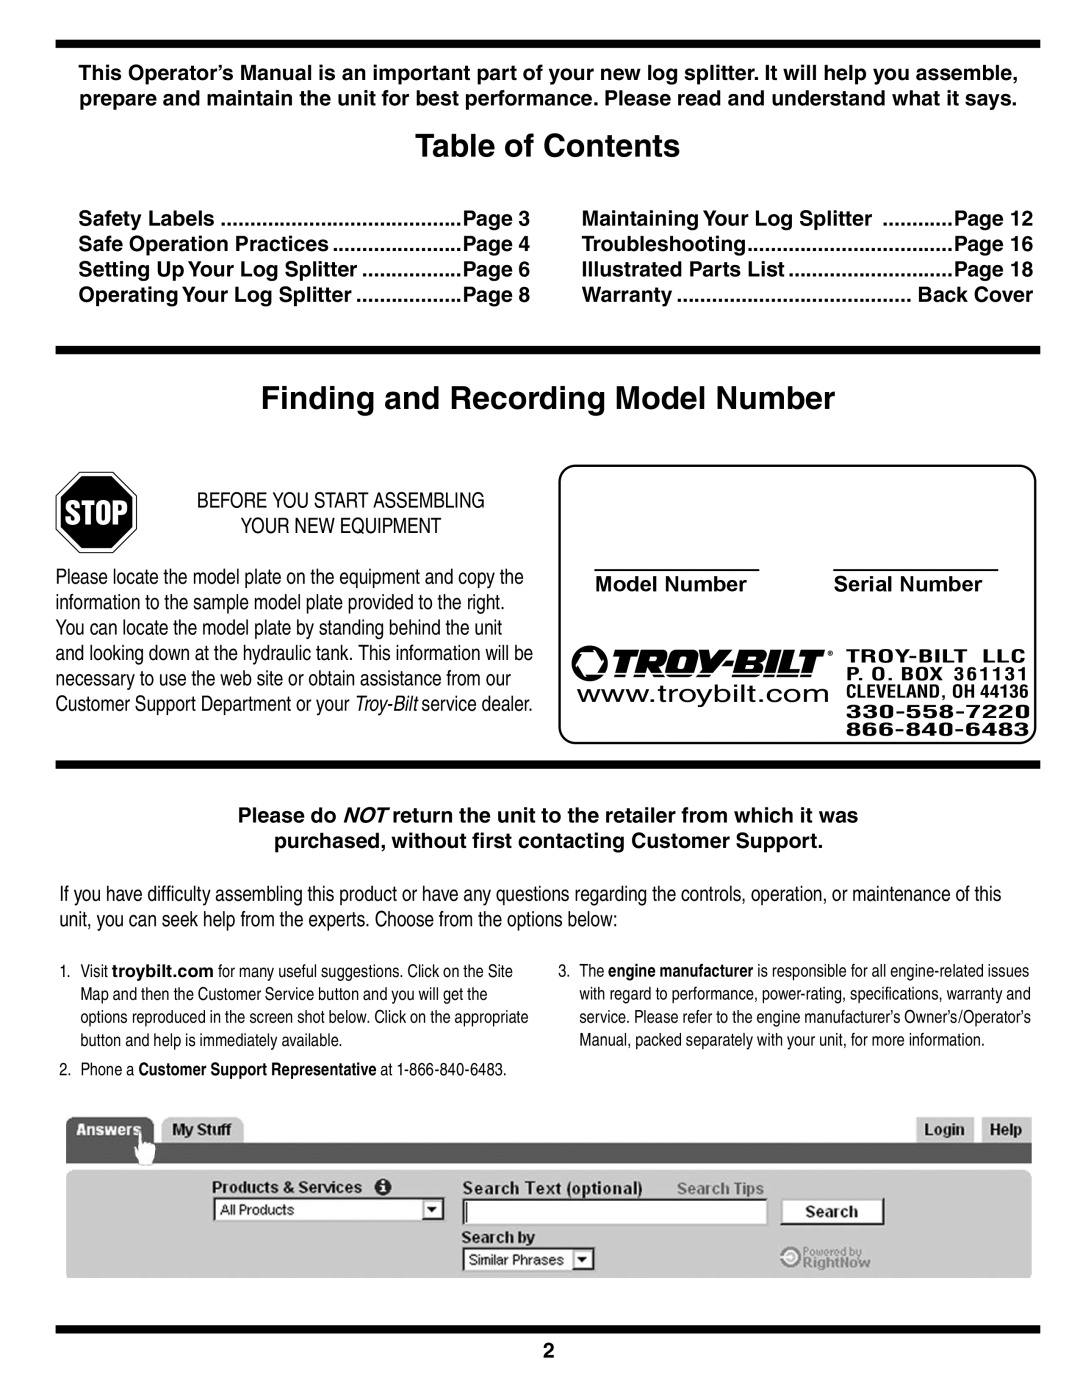 Troy-Bilt 570 manual Table of Contents, Finding and Recording Model Number, Stop, Serial Number 